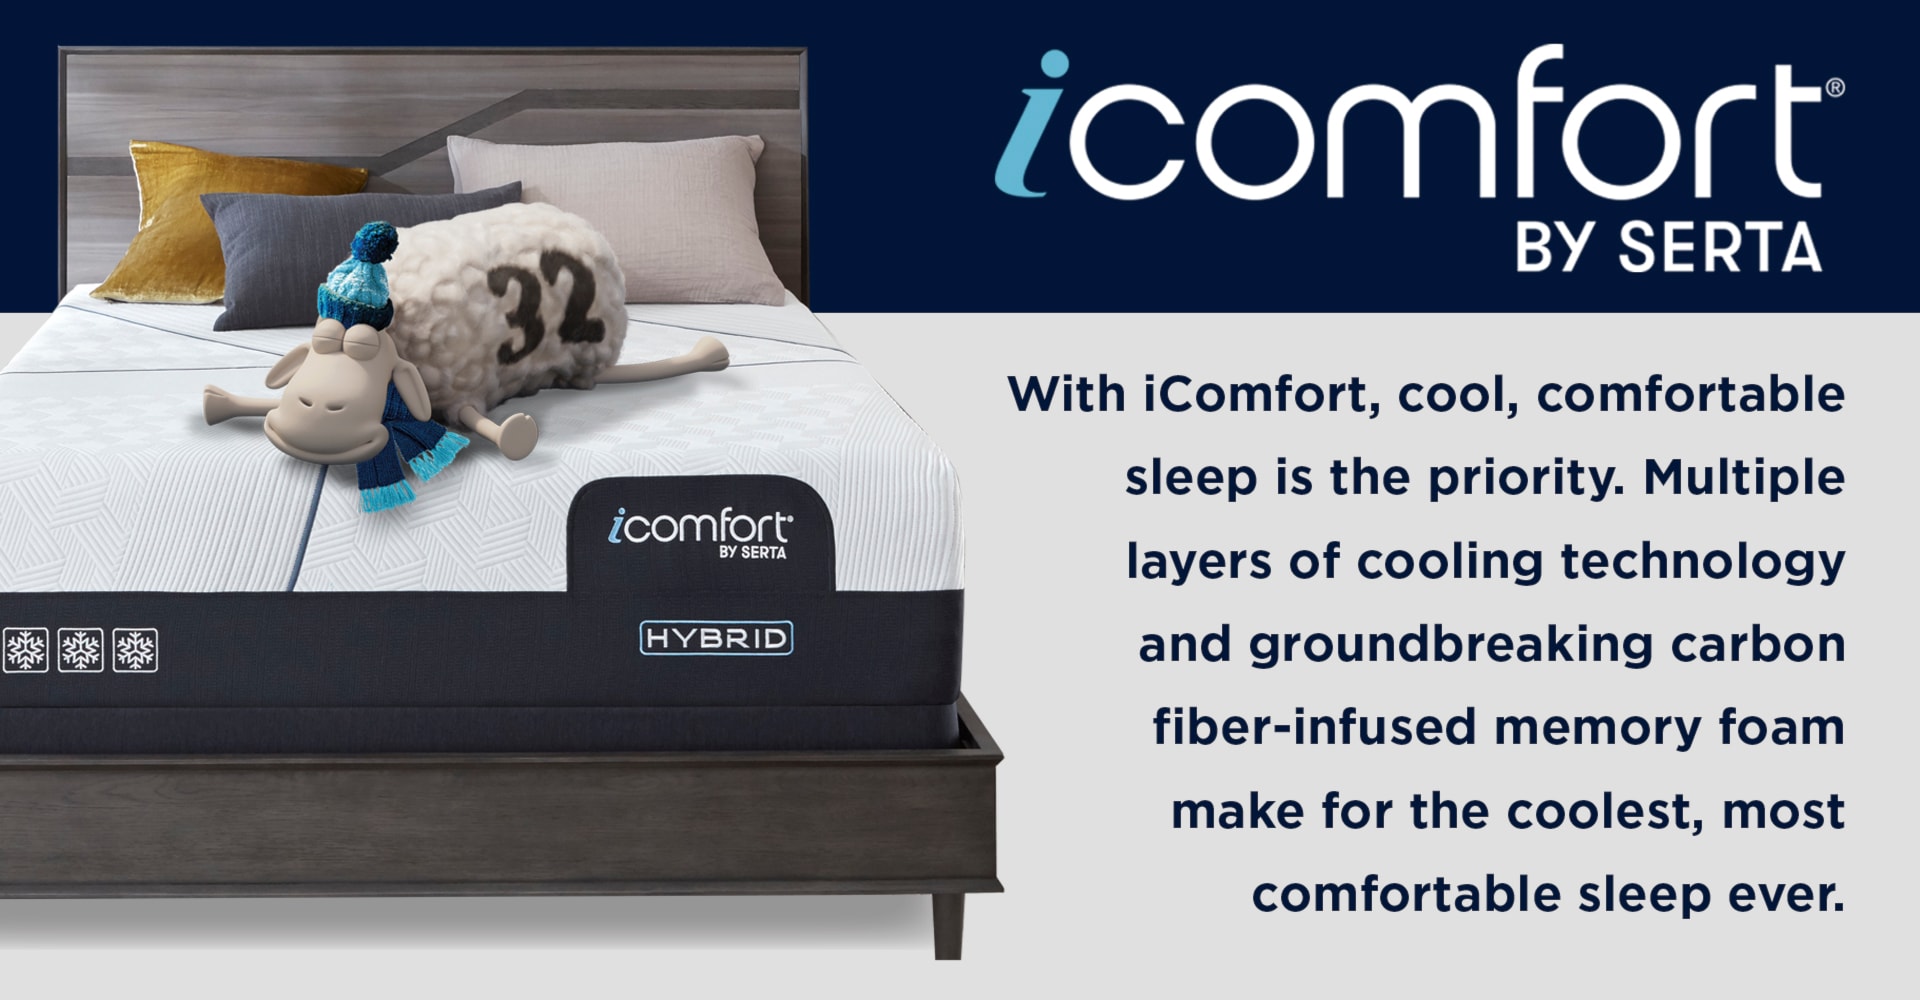 iComfort by Serta | With iComfort, cool, comfortable sleep is the priority. Multiple layers of cooling technology and groundbreaking carbon fiber-infused memory foam make the coolest, most comfortable sleep ever.